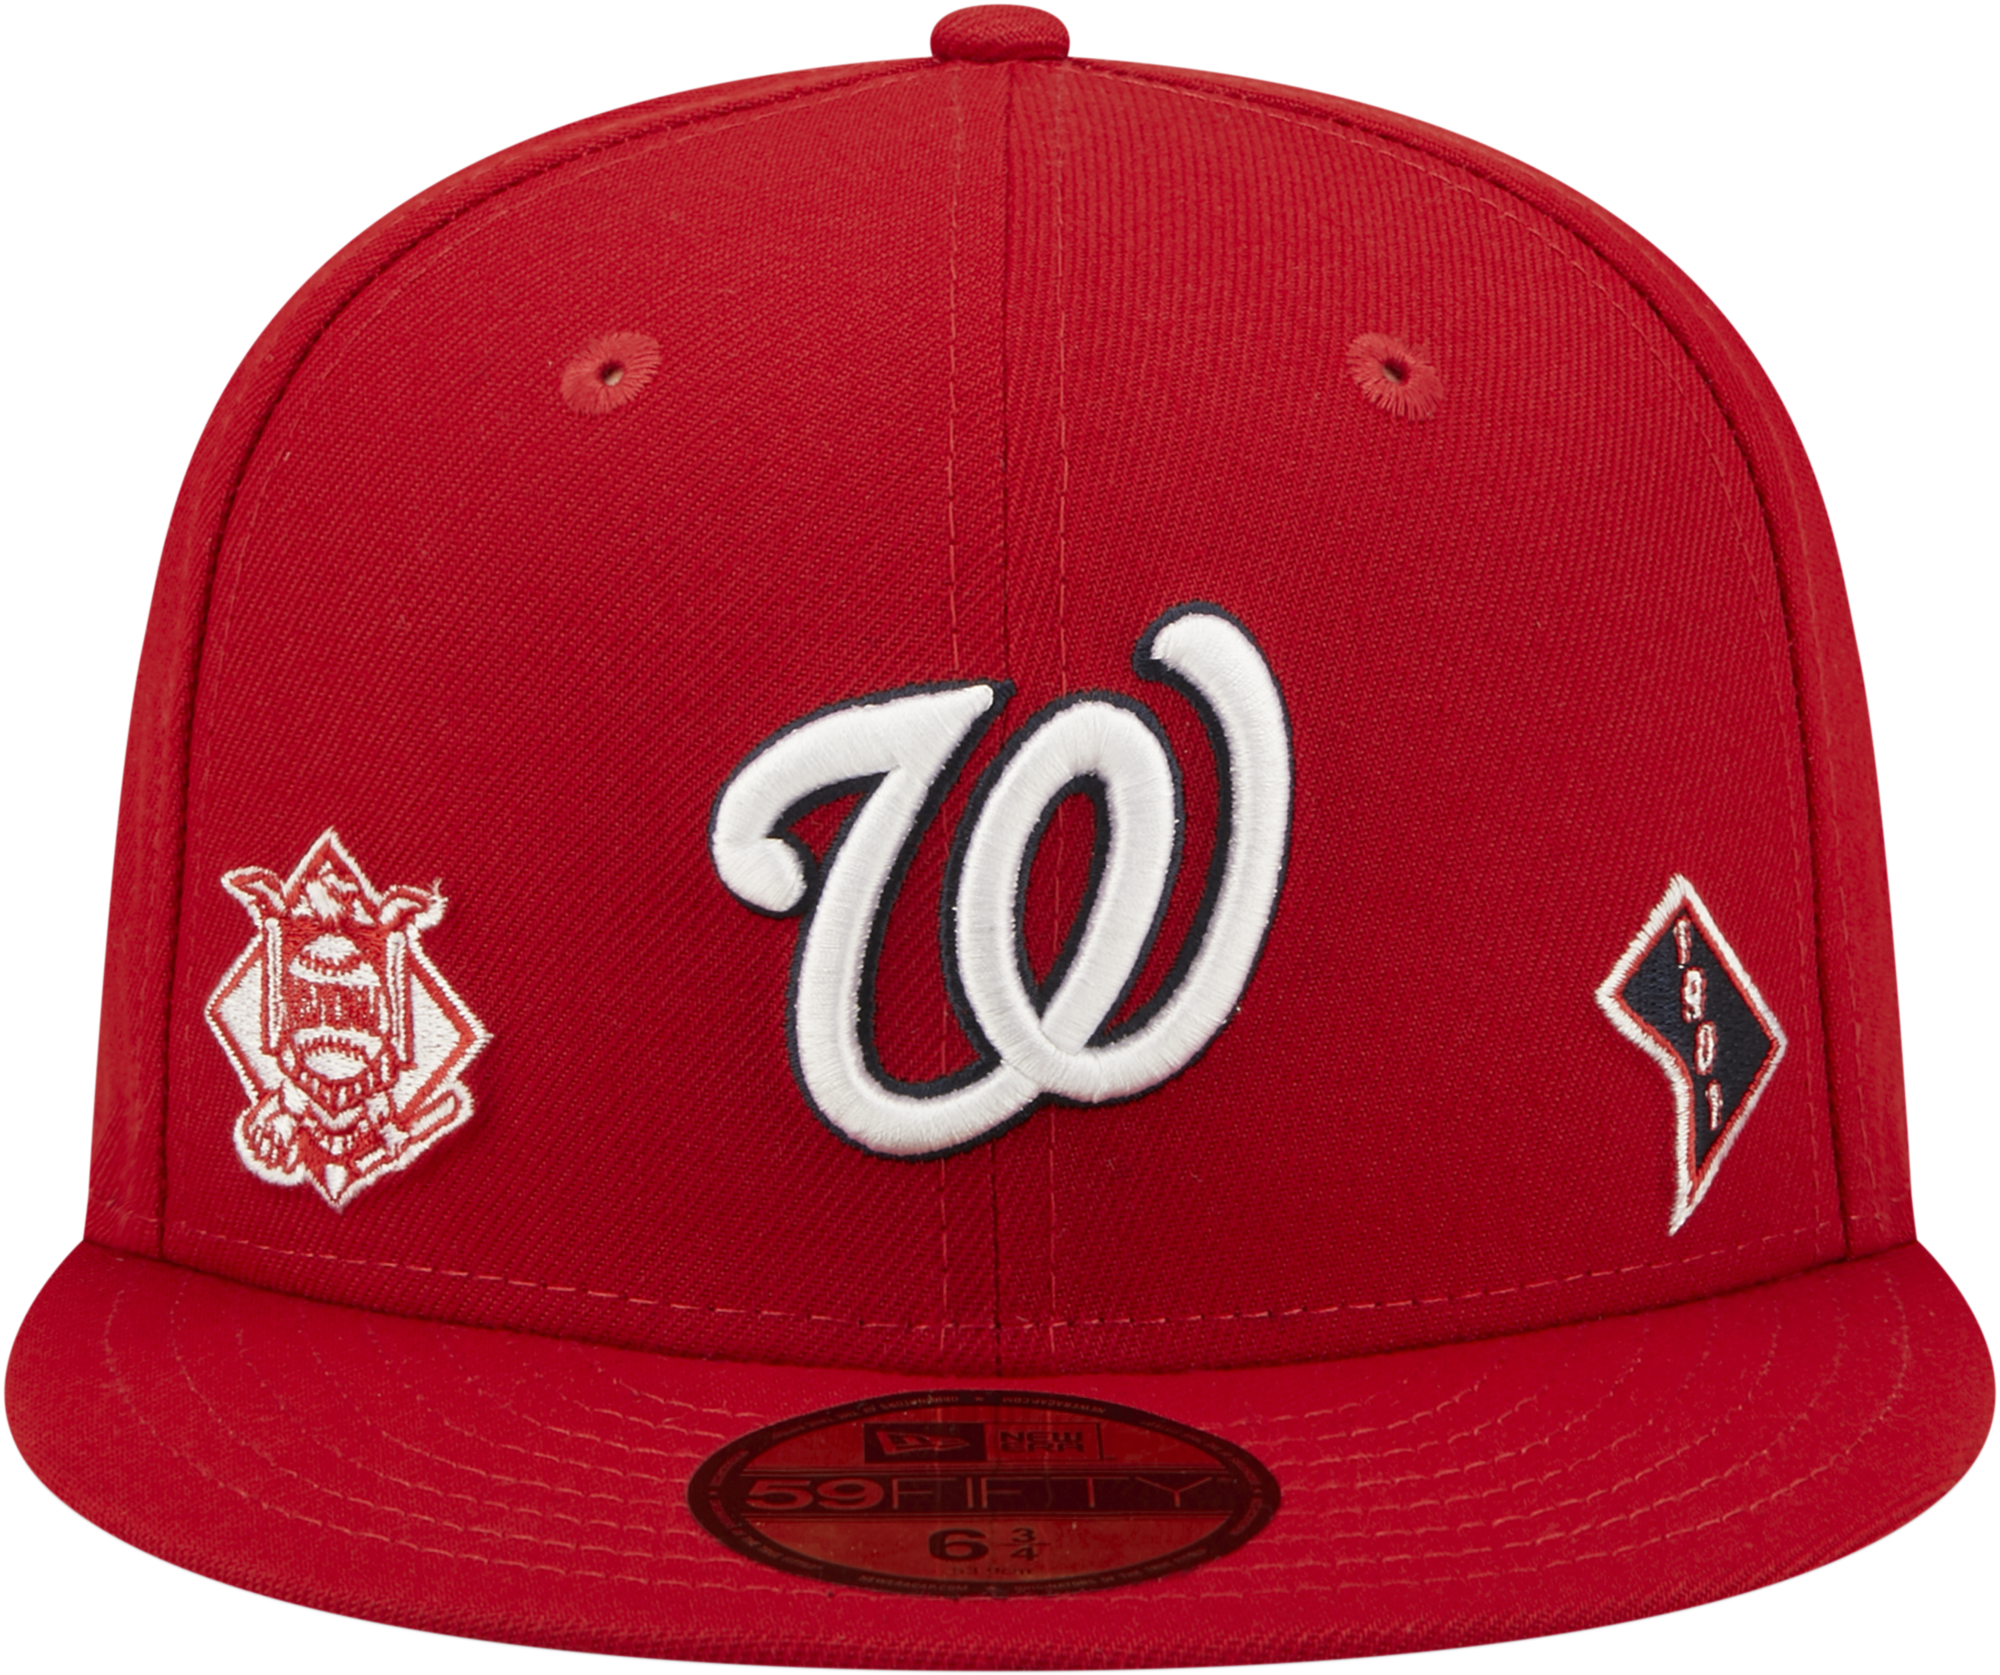 New Era Nationals City Identity Fitted Cap